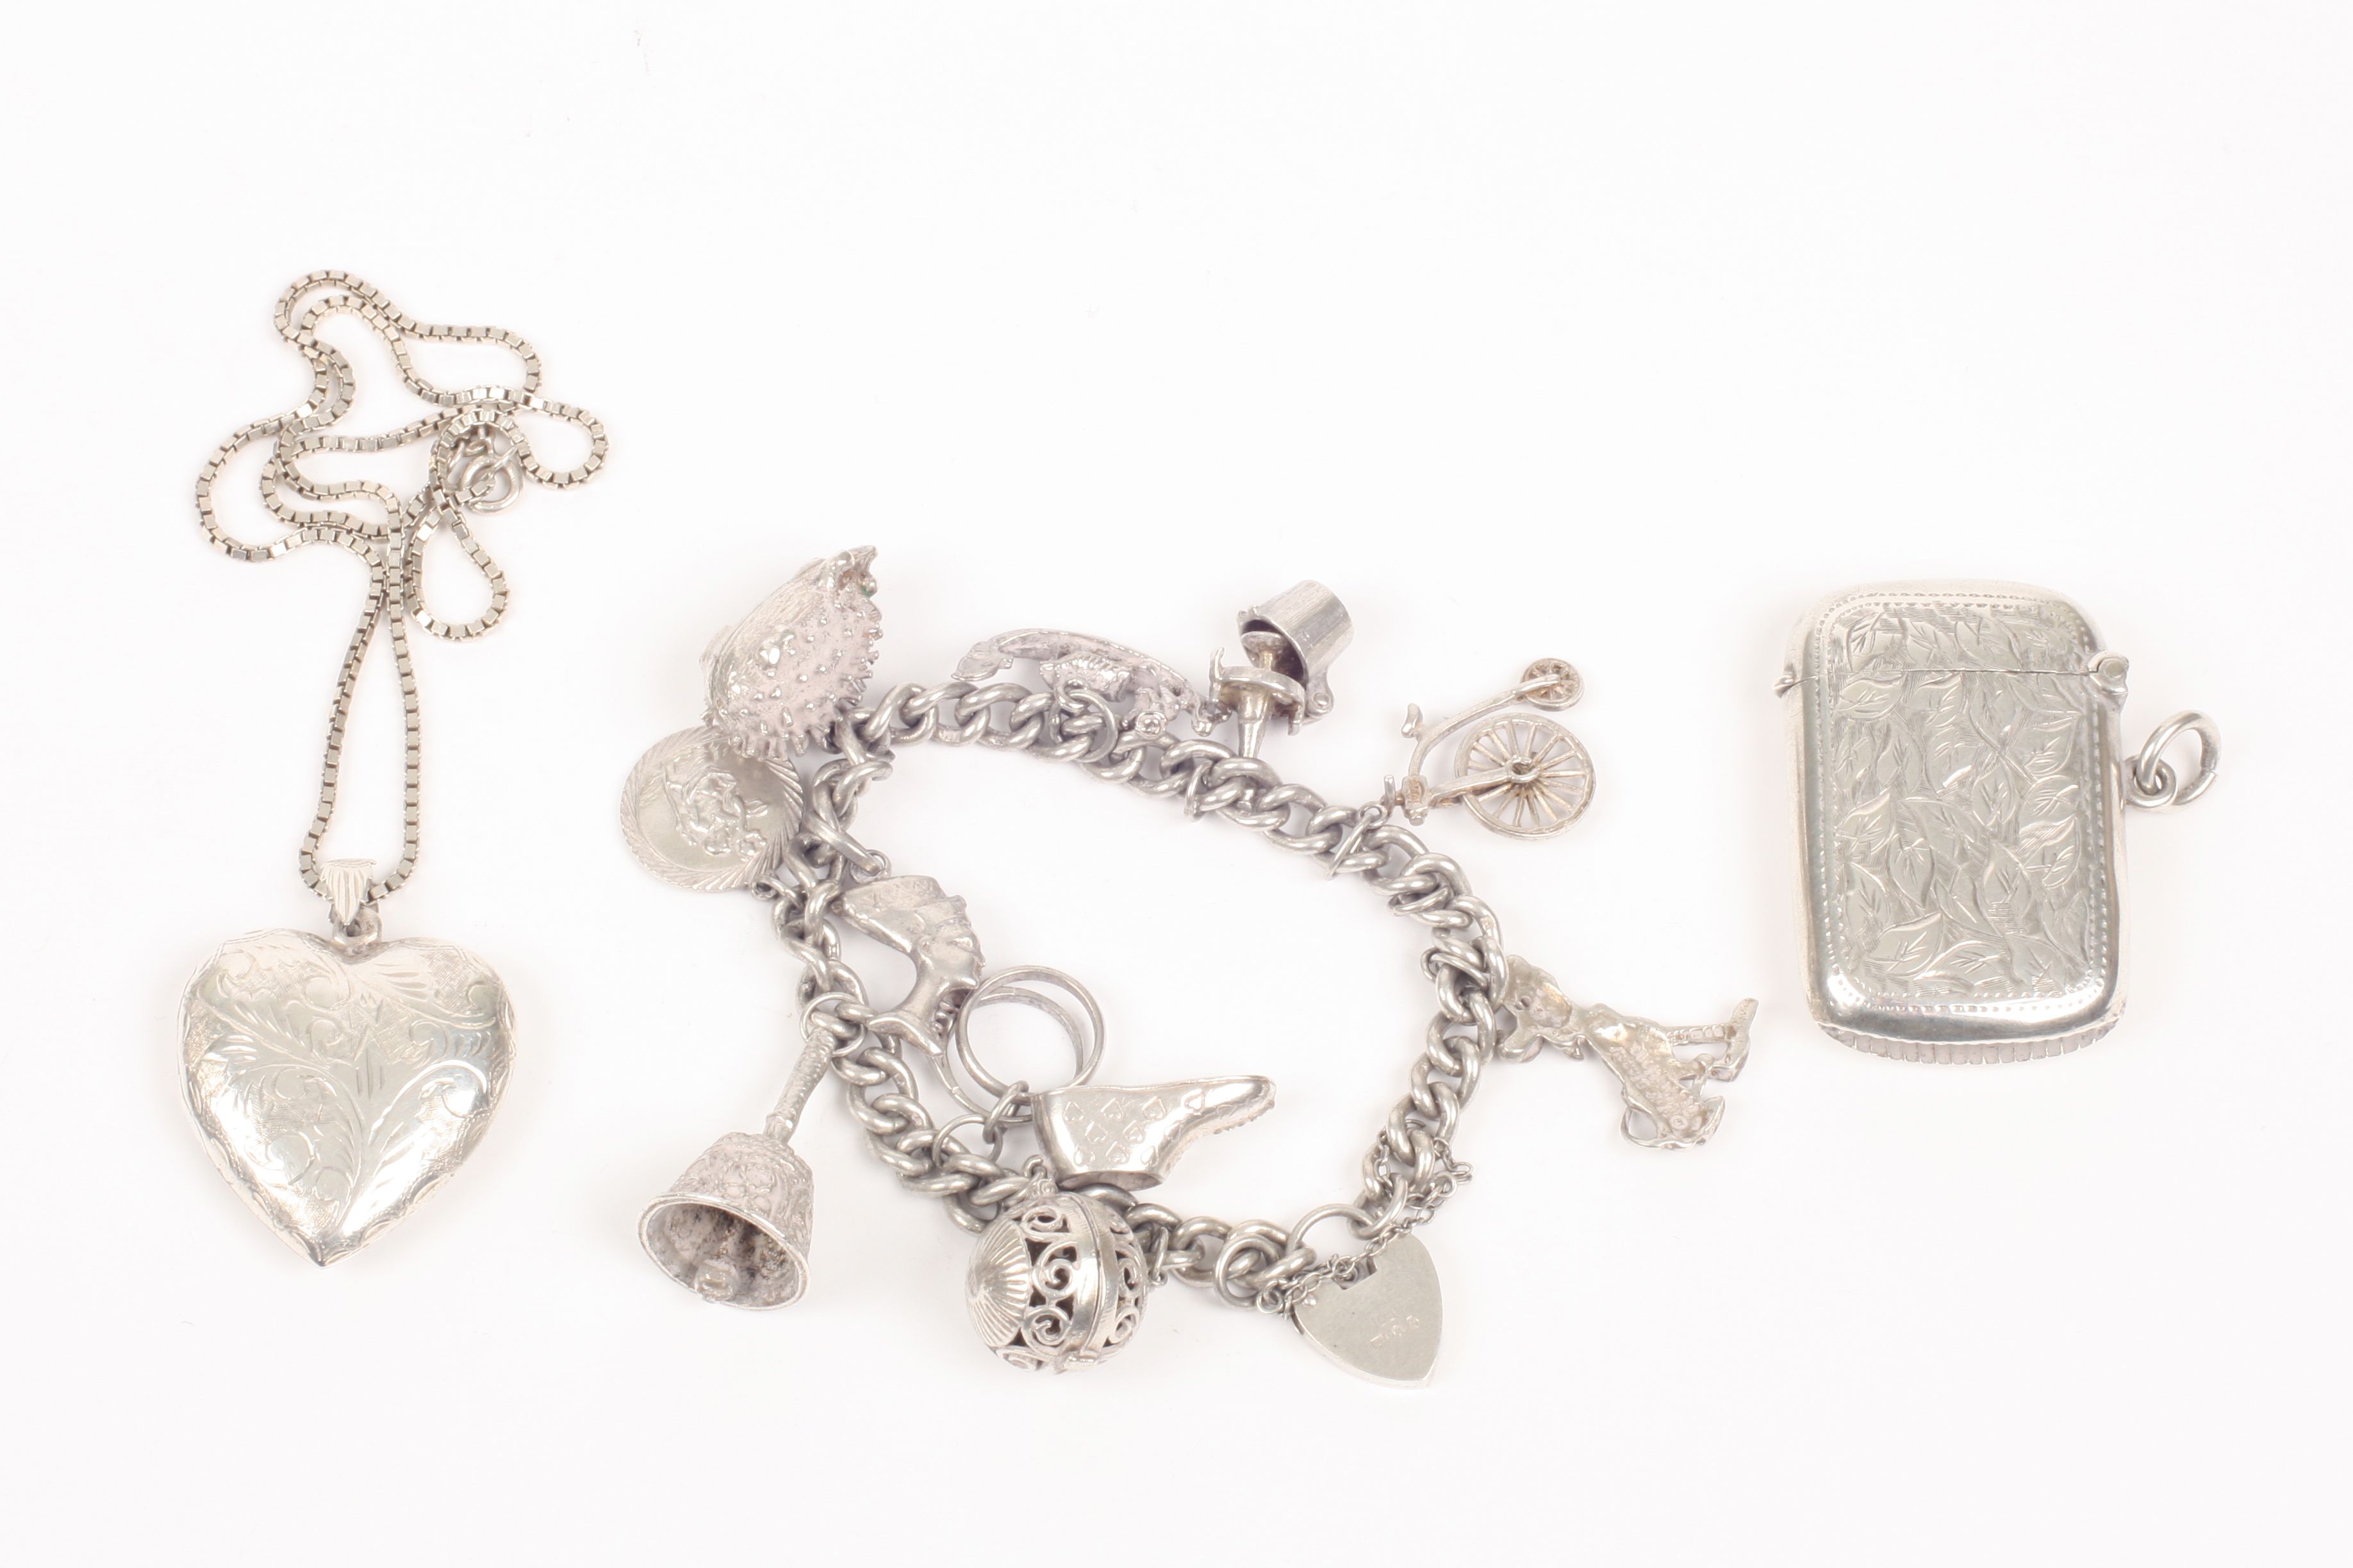 A silver charm bracelet set with 11 charms and padlock clasp, together with a silver heart shaped